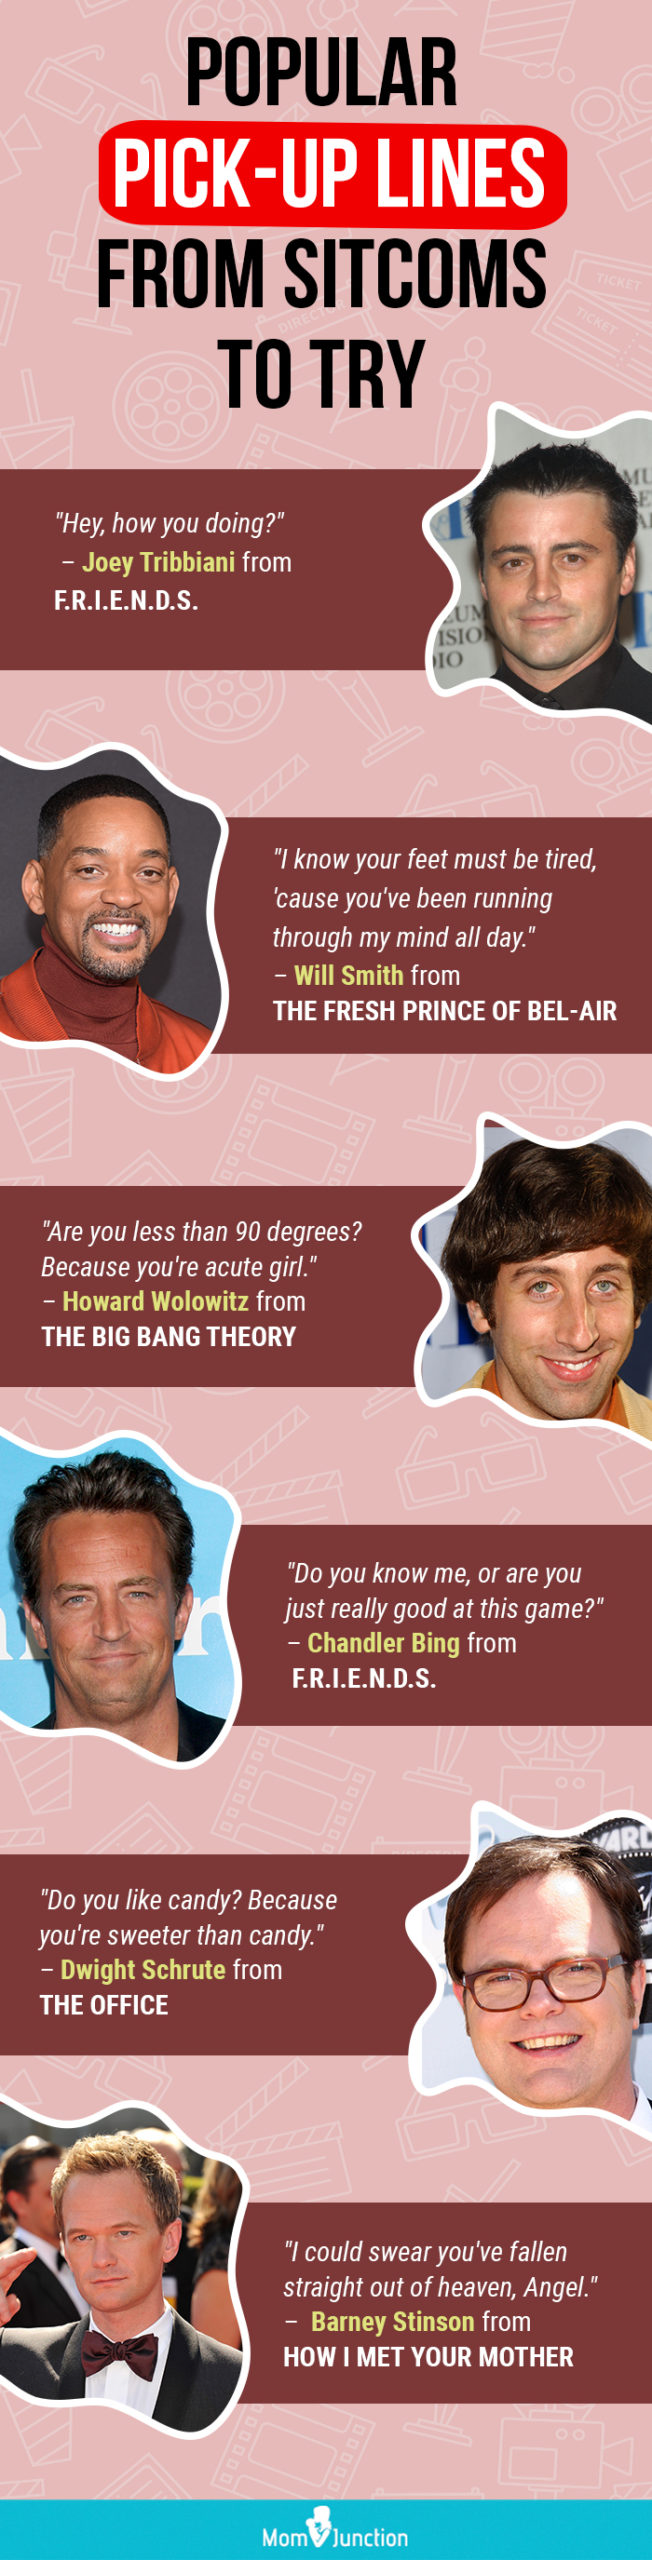 popular pick up lines from sitcoms to try [infographic]